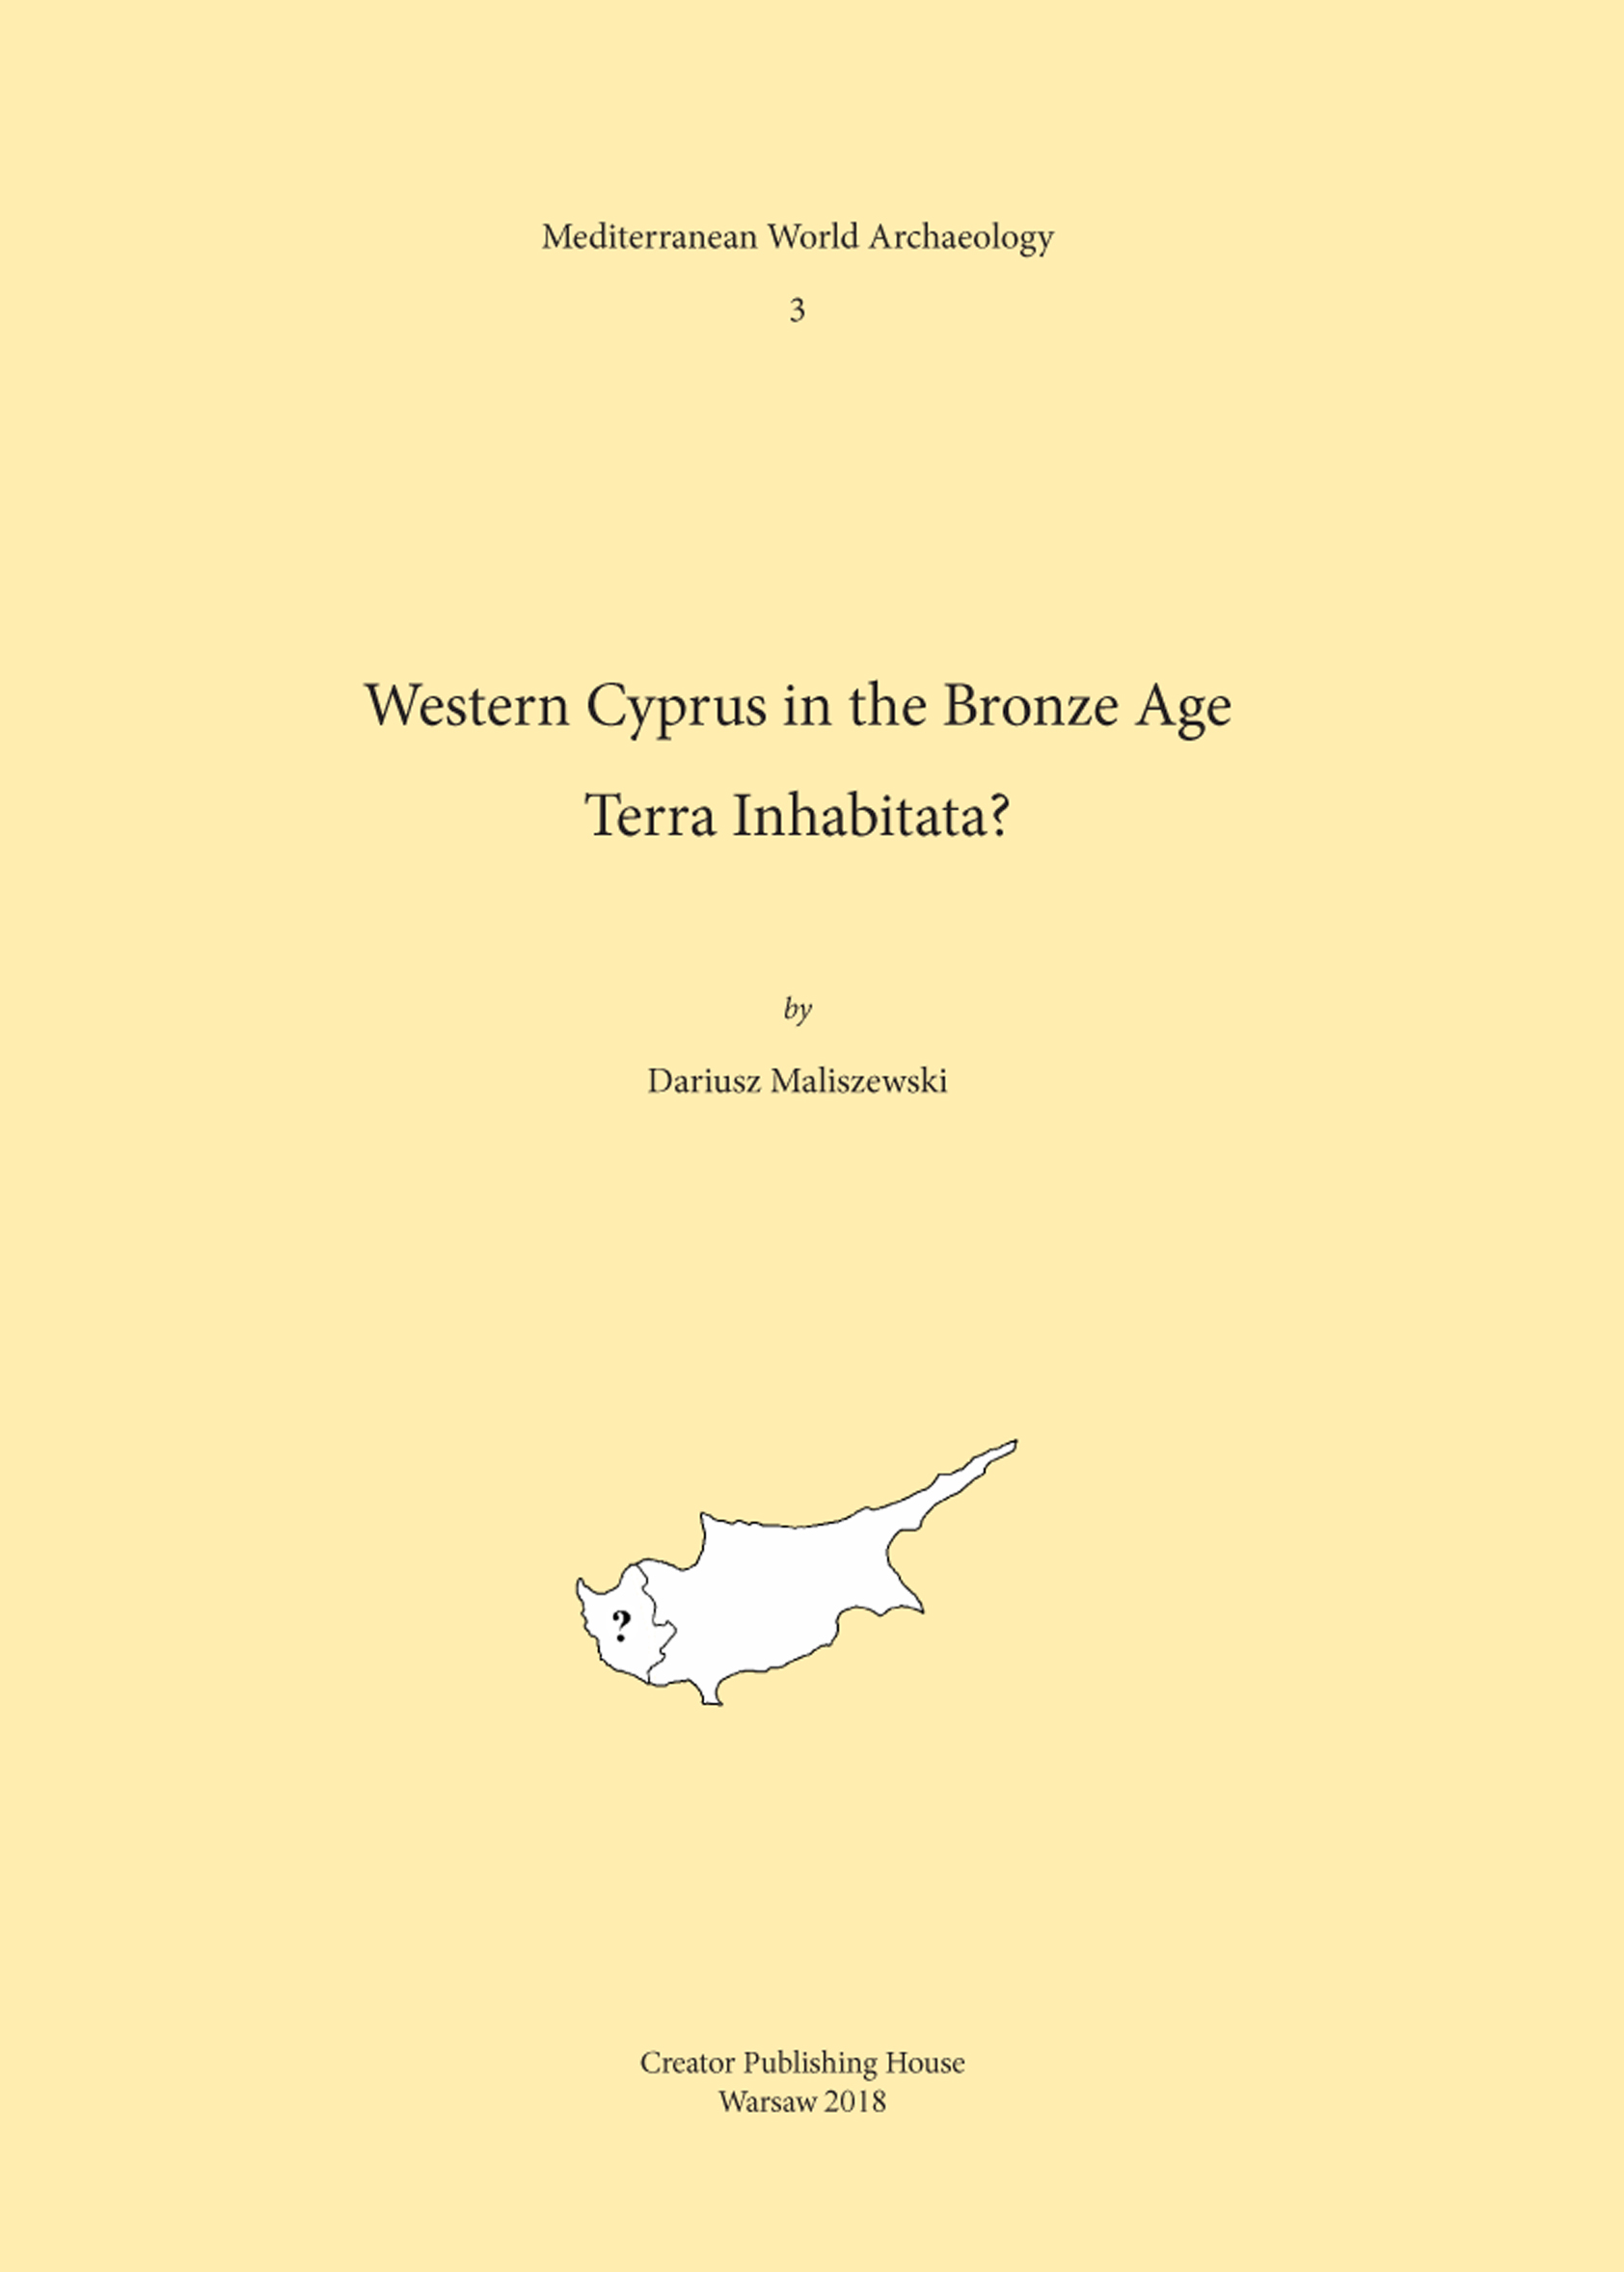 Western Cyprus in the Bronze Age